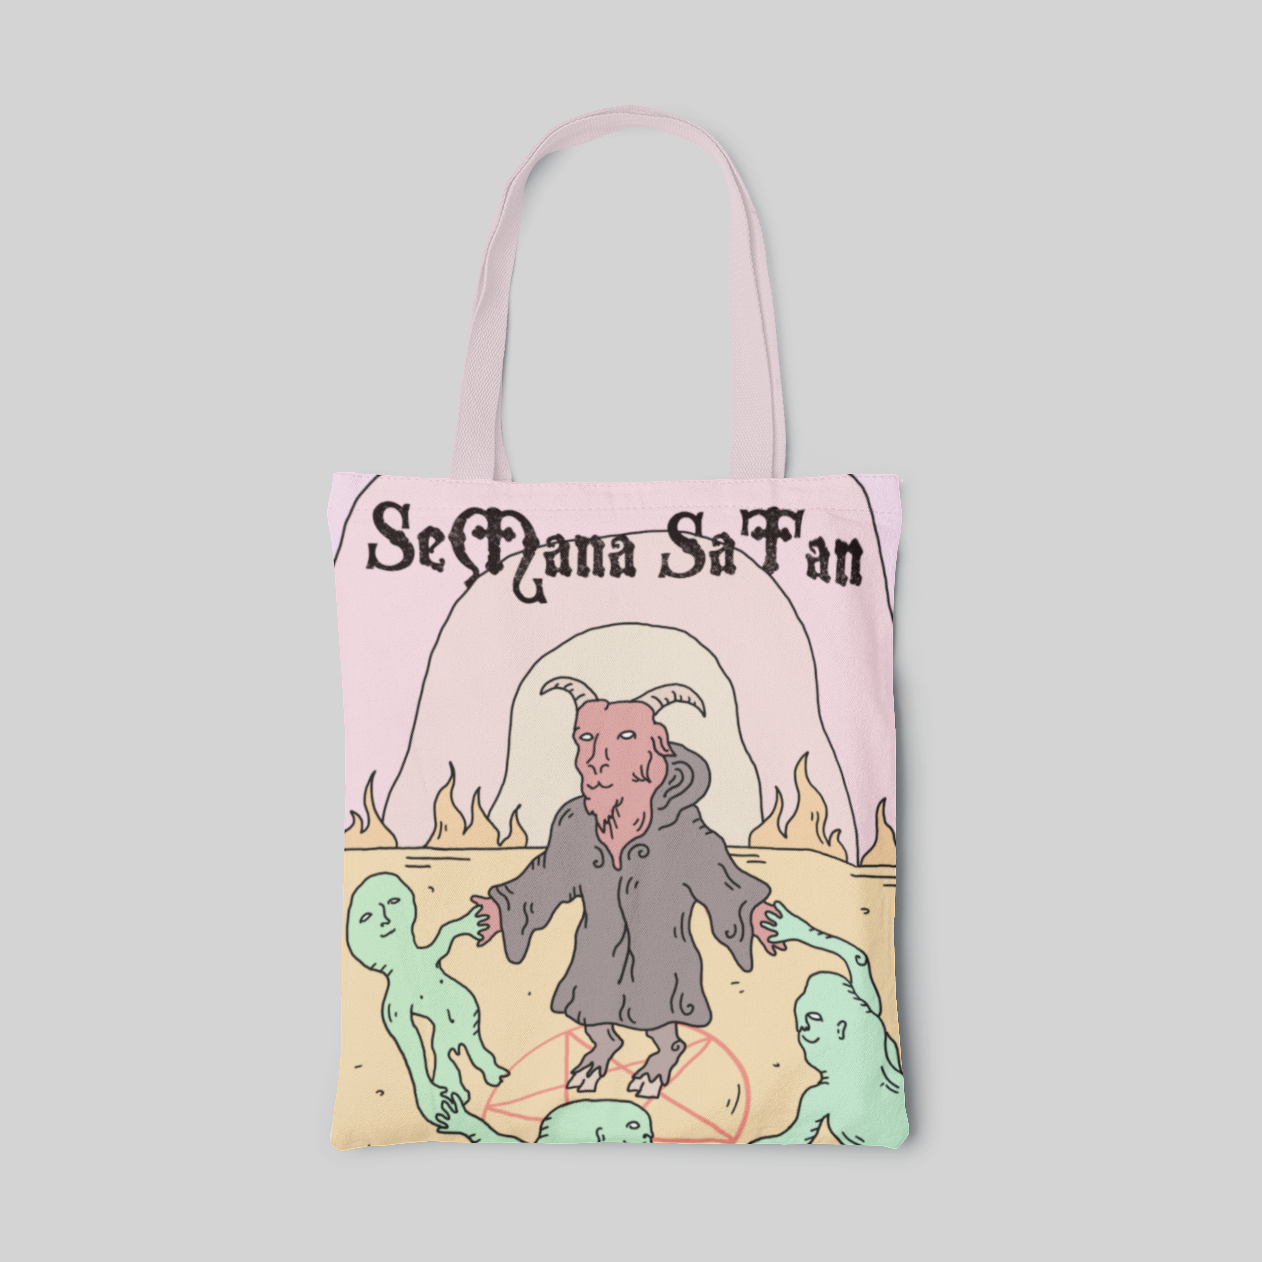 lowbrow designed tote bag with goat satan illustration and it circling with three aliens on a pink and yellow background, front side